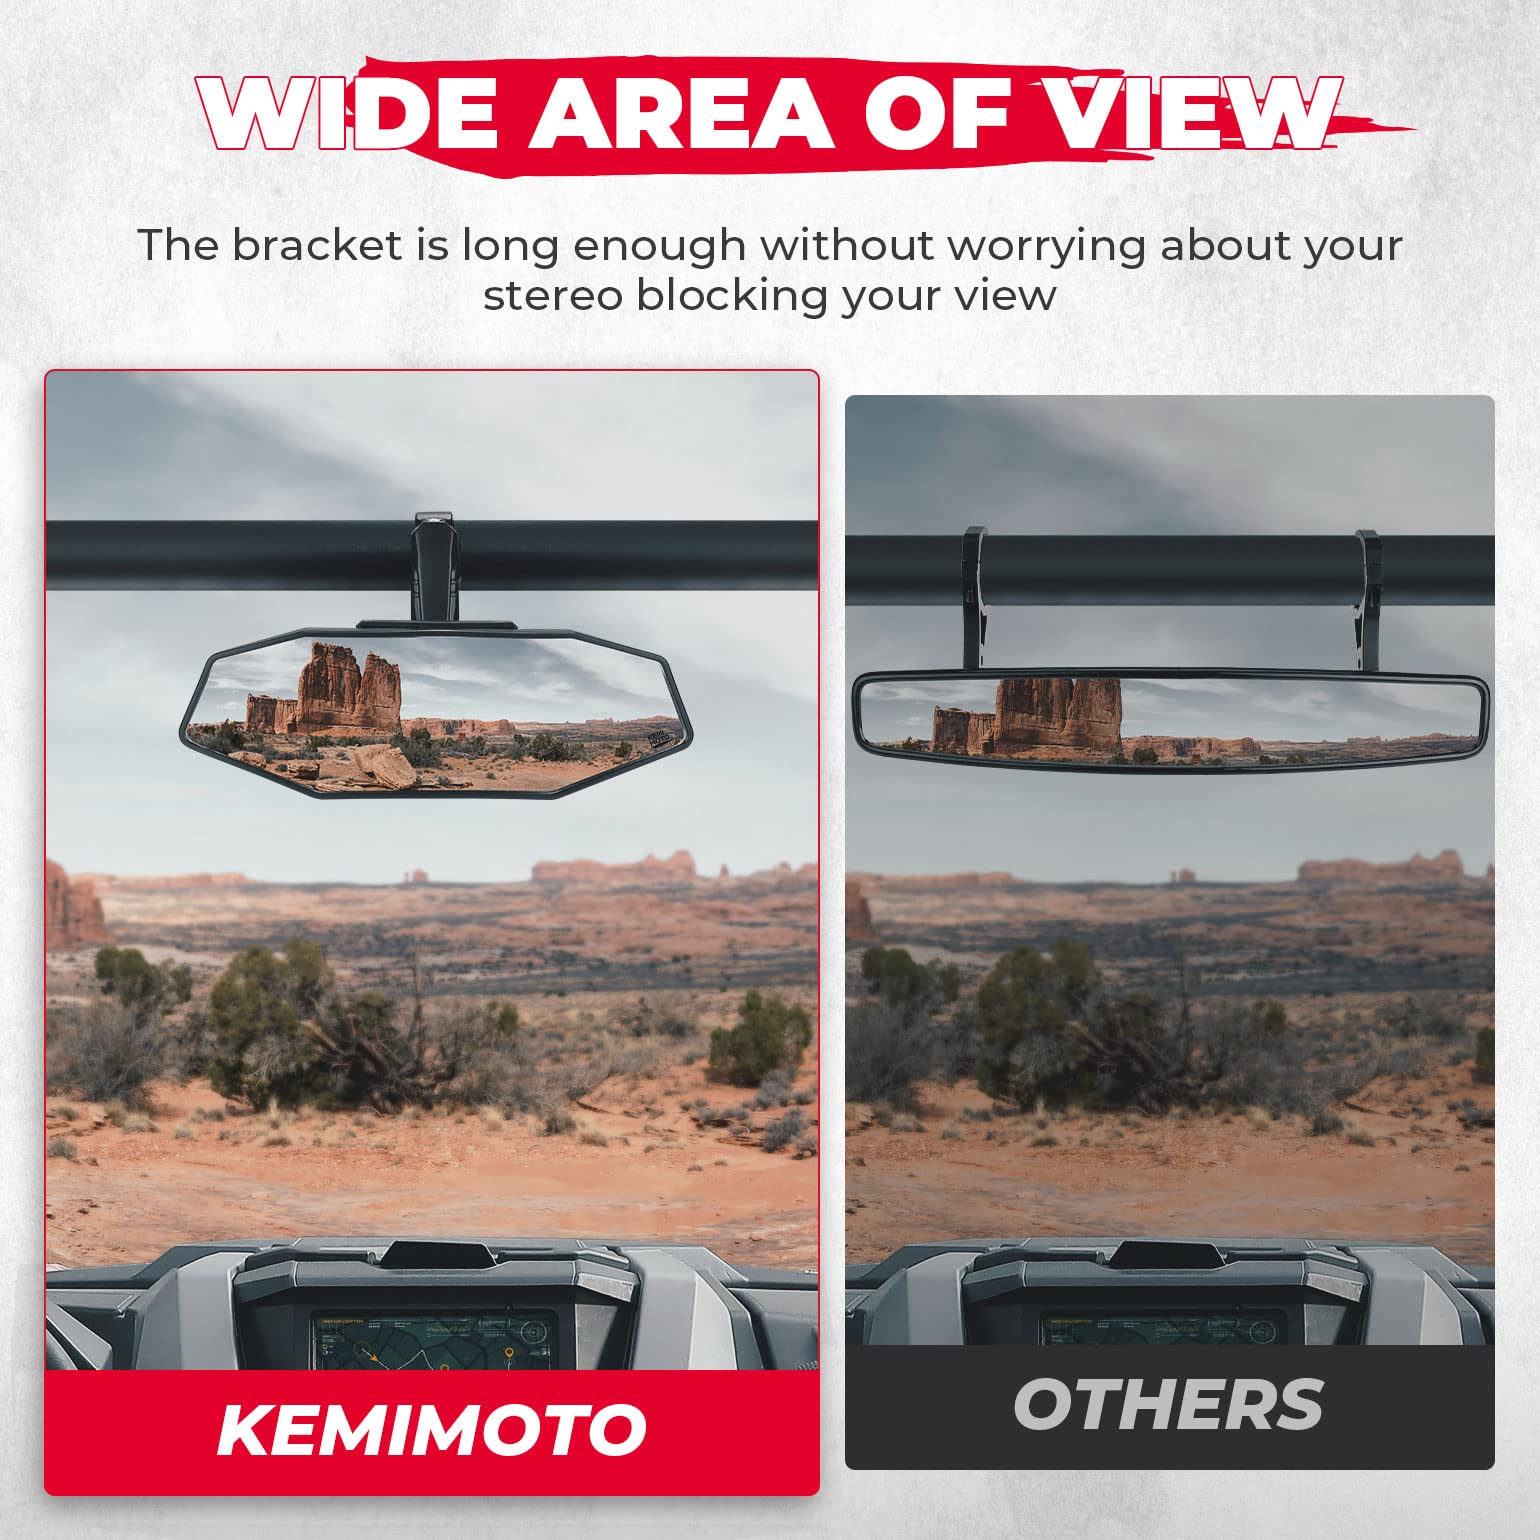 UTV Rear View Mirror Fit for 1.6